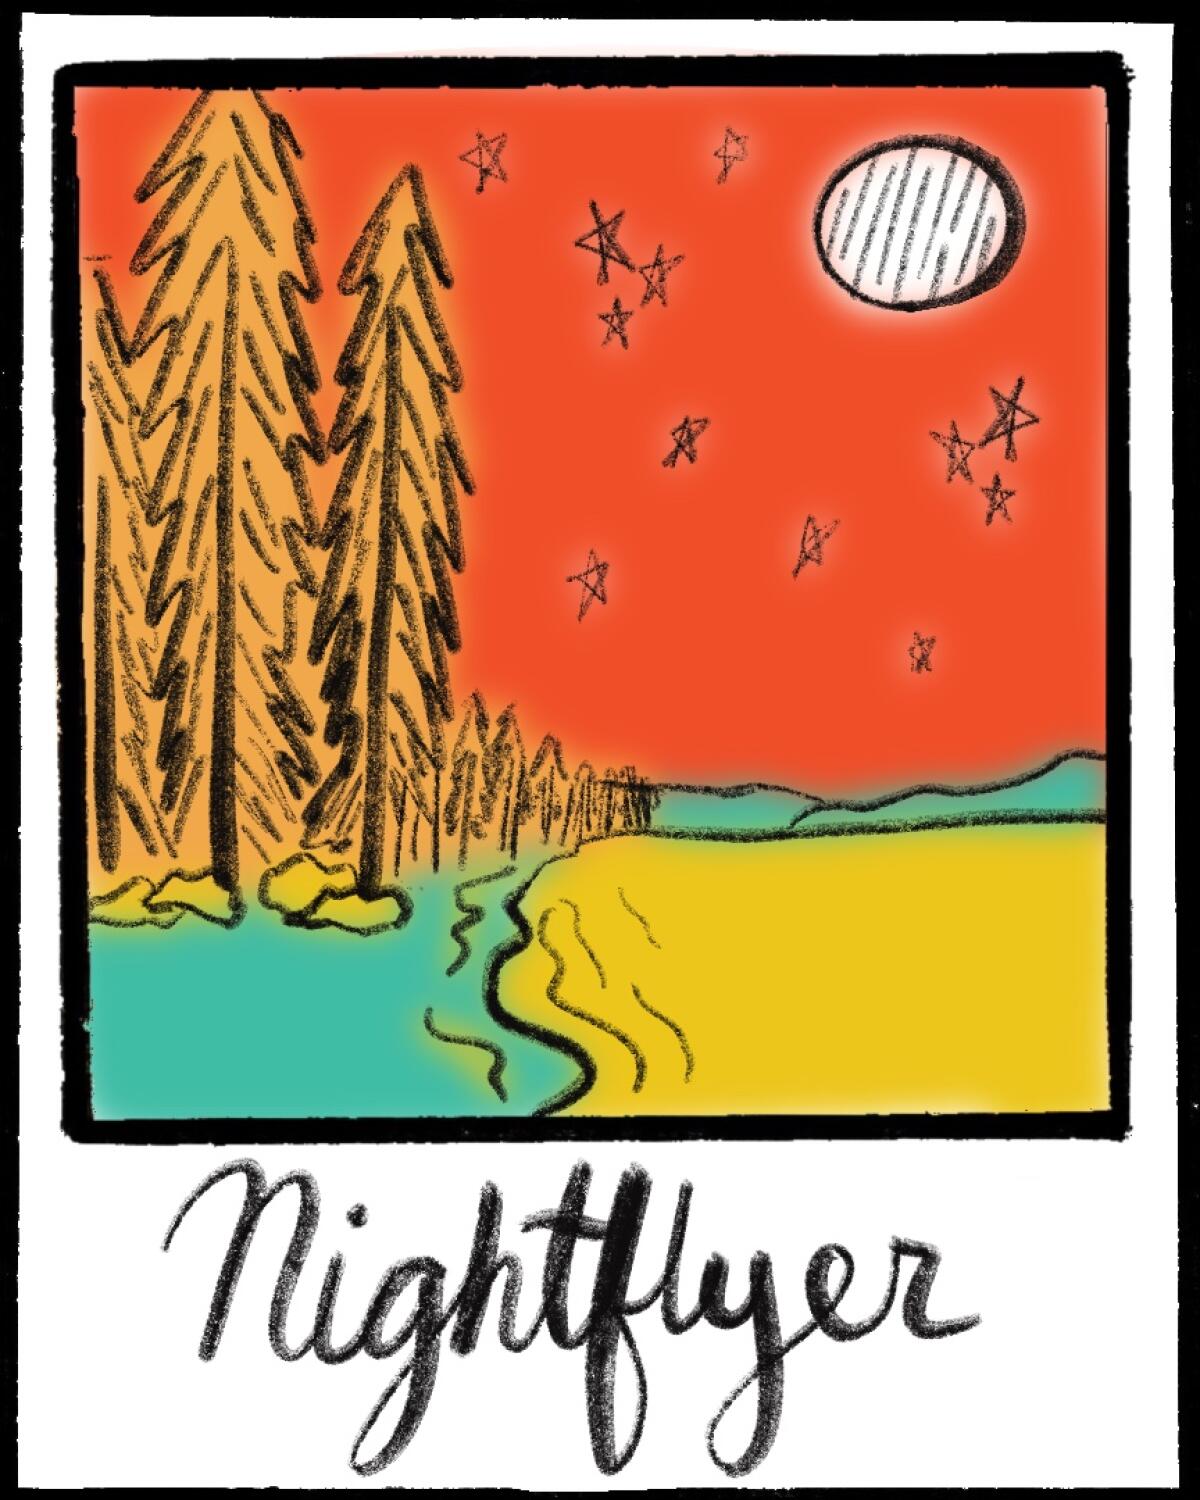 Illustration that looks like a Polaroid photo of a view on a Lake Tahoe beach, with the word "Nightflyer"